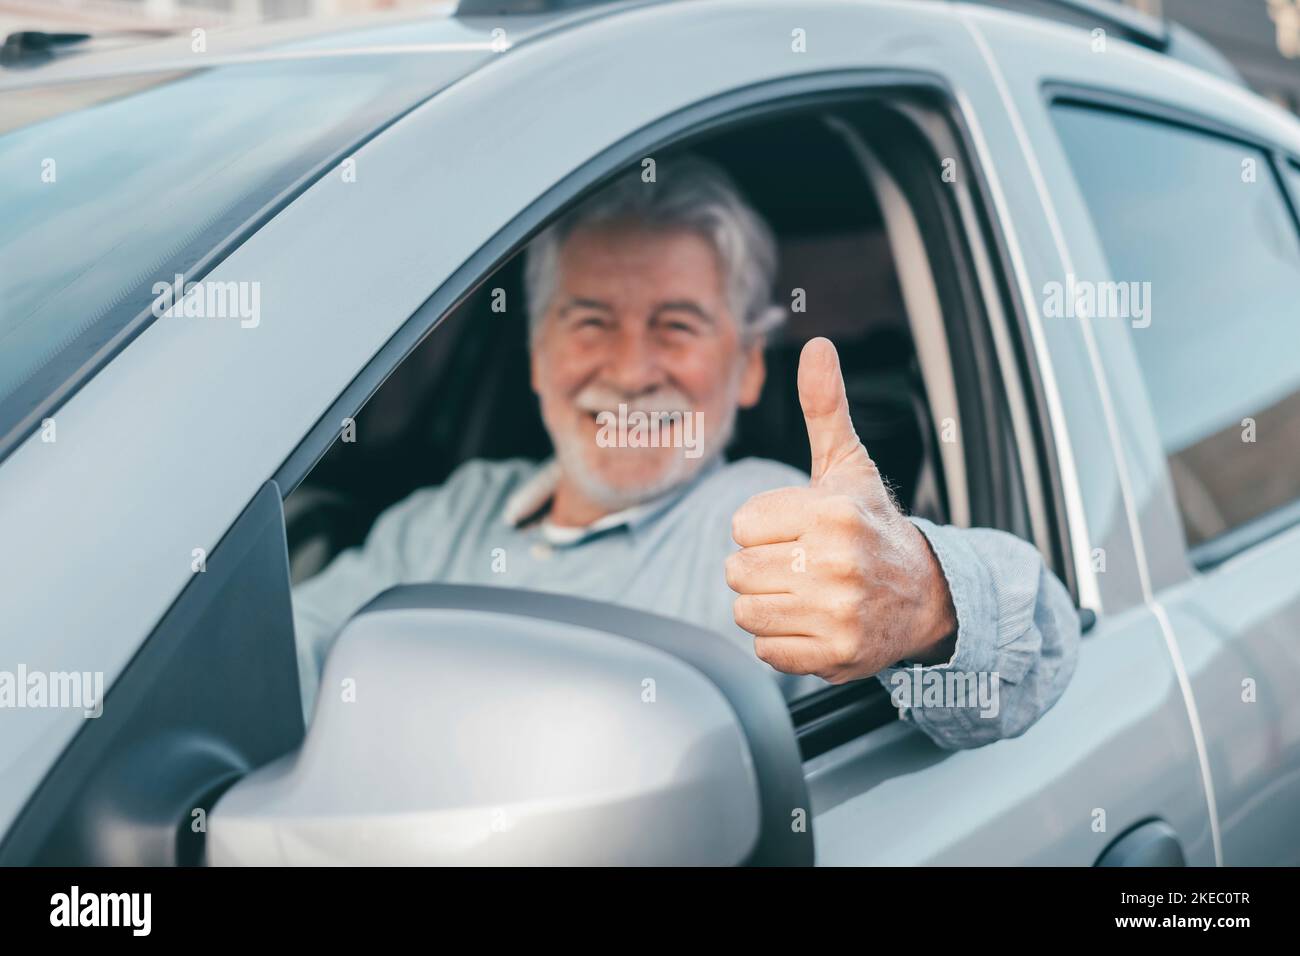 Happy owner looking at the camera with happy face and thumbs up. Handsome bearded mature man sitting relaxed in his newly bought car looking out the window smiling joyfully. One old senior driving and having fun. Stock Photo